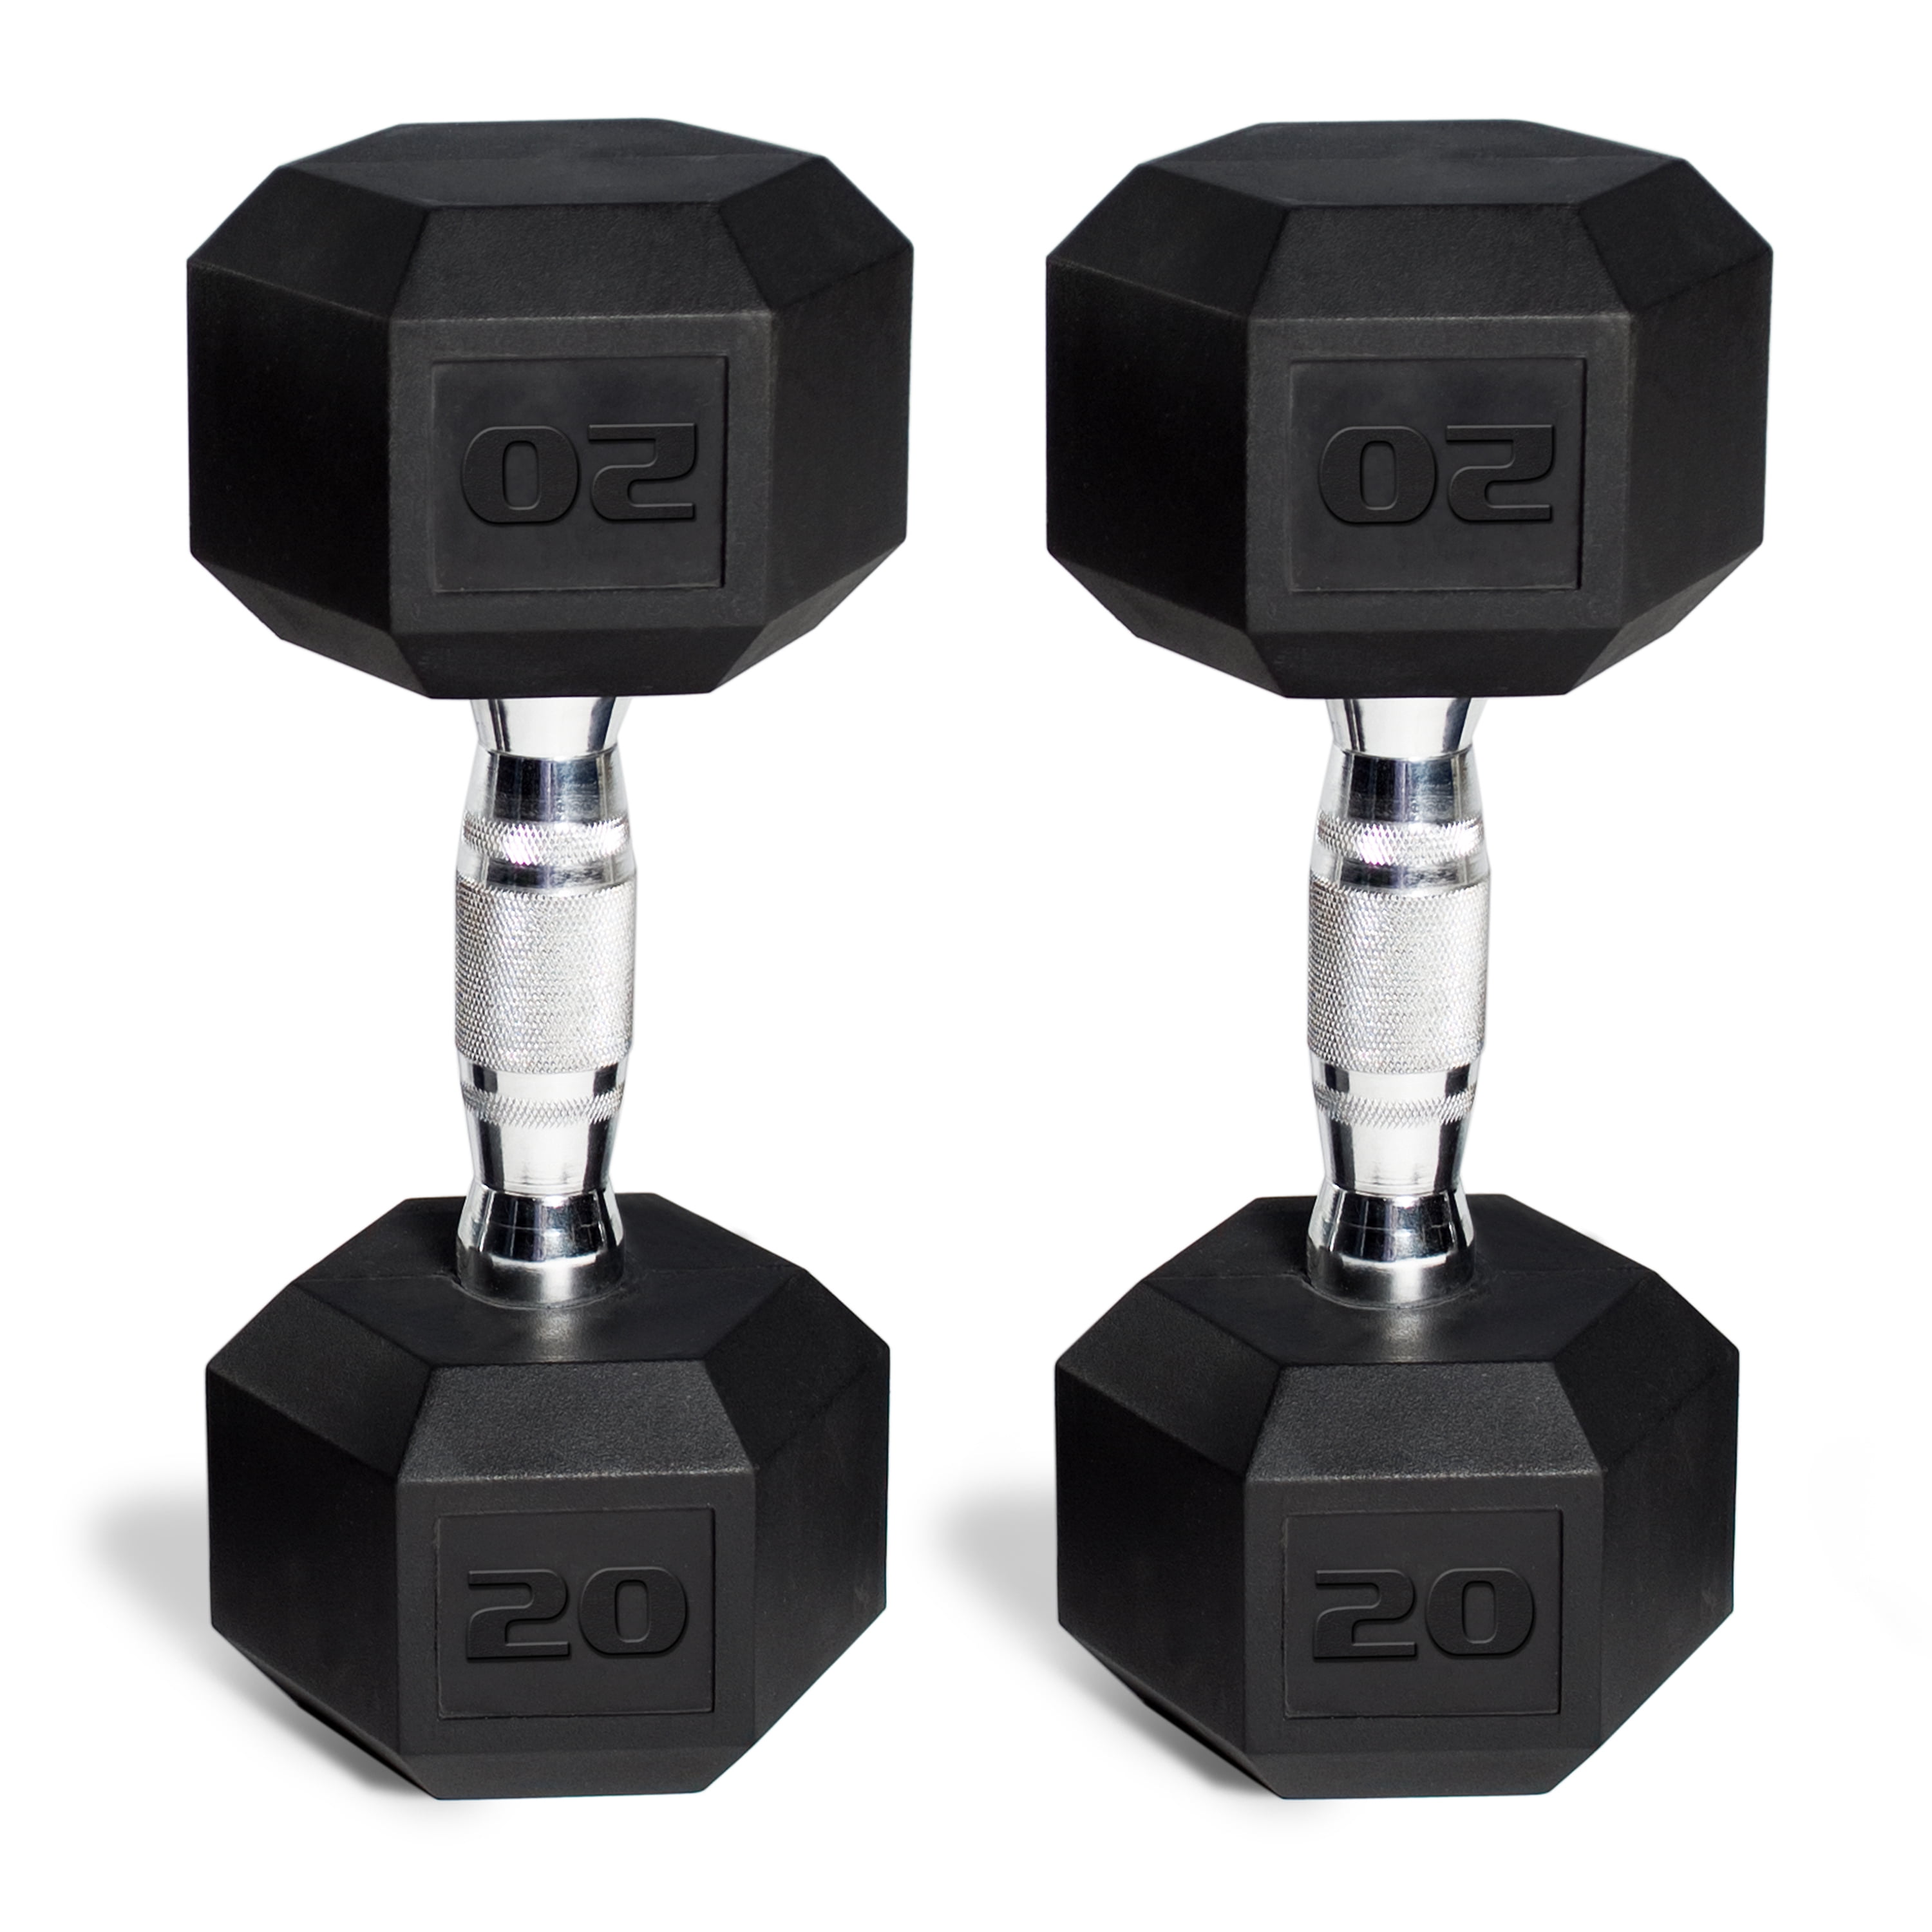 Shop Weights & Free Weights - Best Price at DICK'S